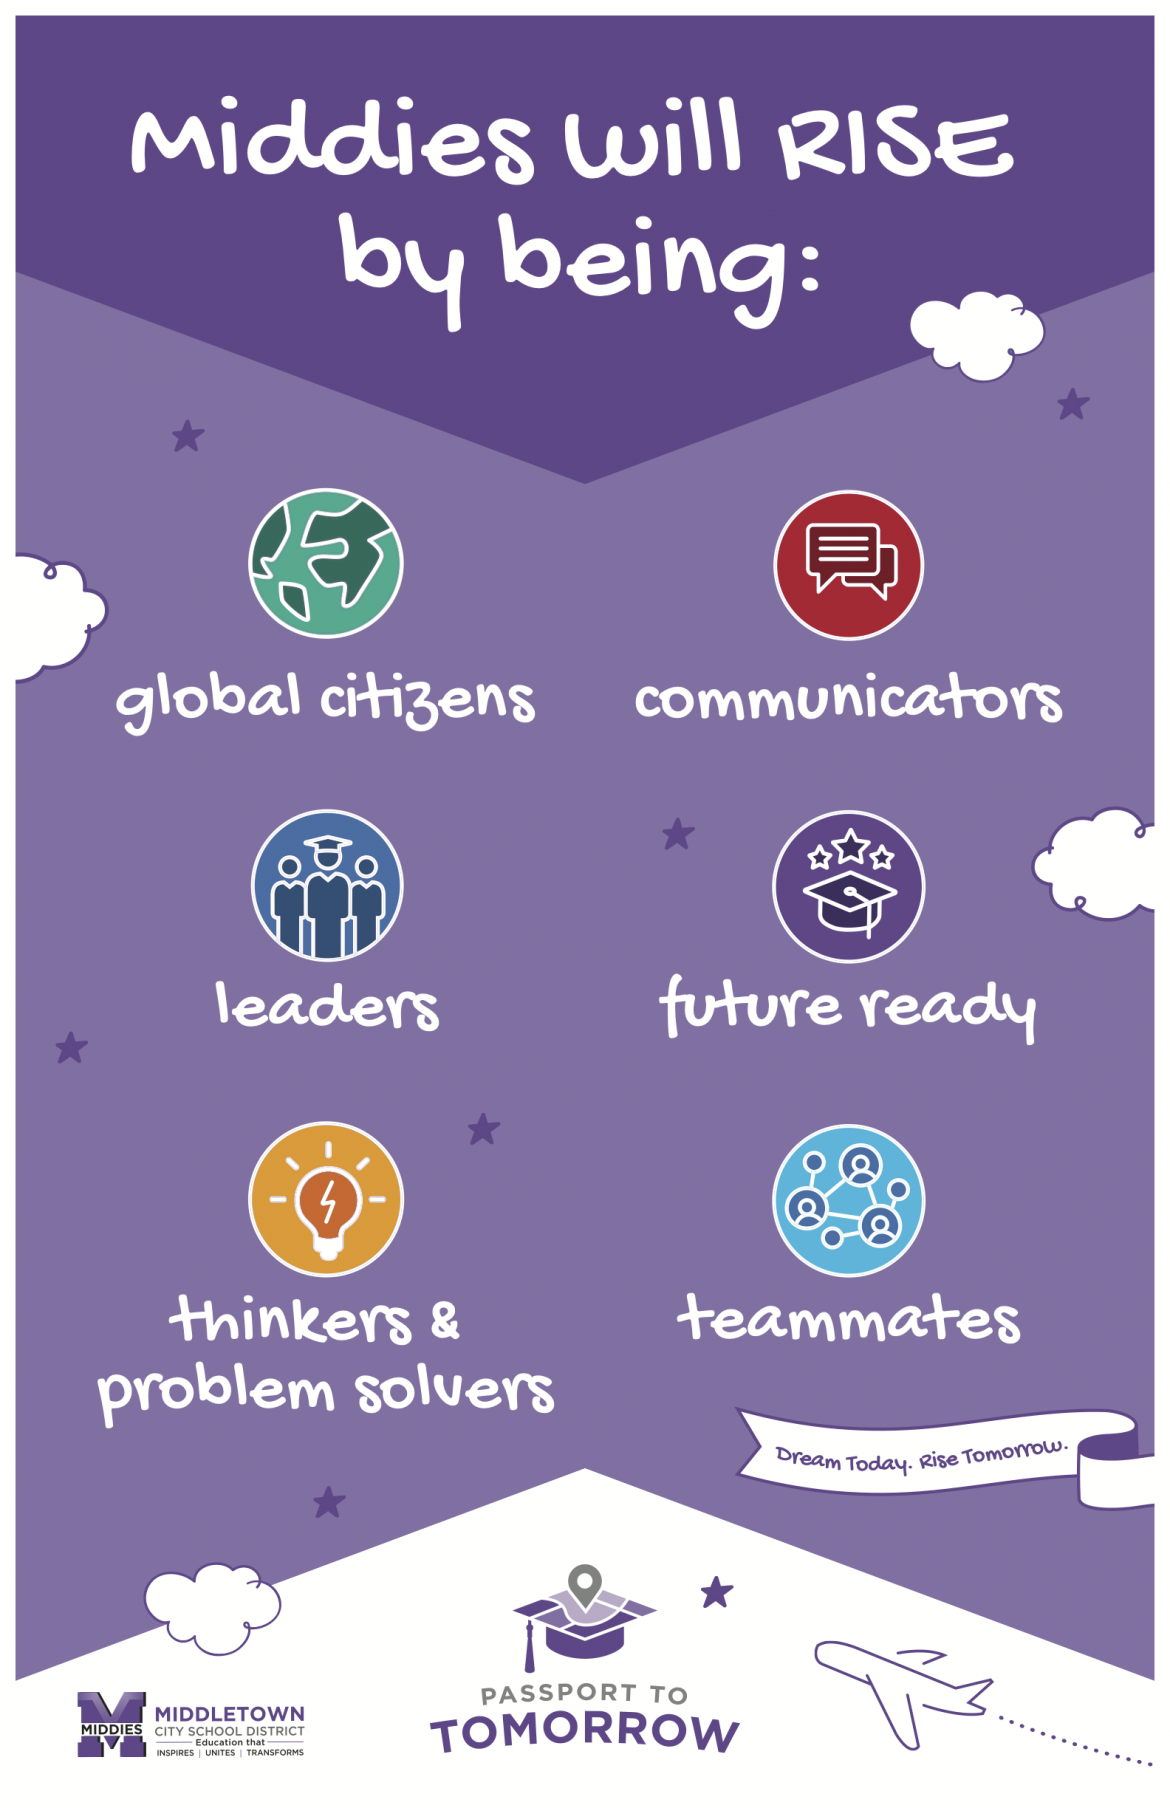 Middies Will Rise By Being global citizens, communicators, leaders, future ready, thinkers & problem solvers, and teammates poster